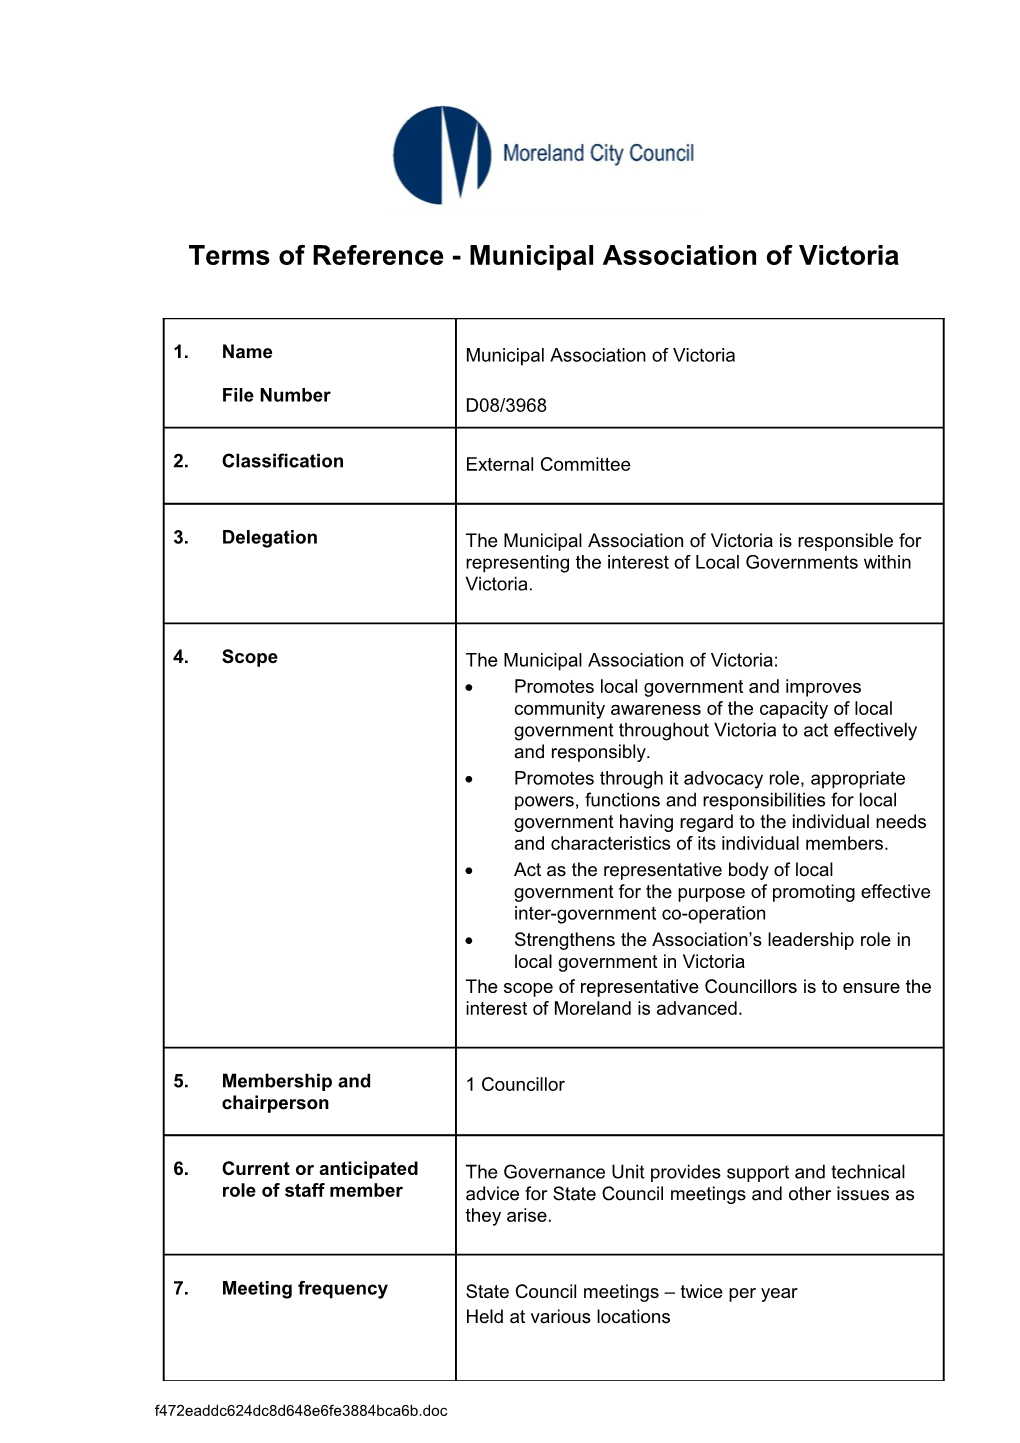 Terms of Reference - Municipal Association of Victoria